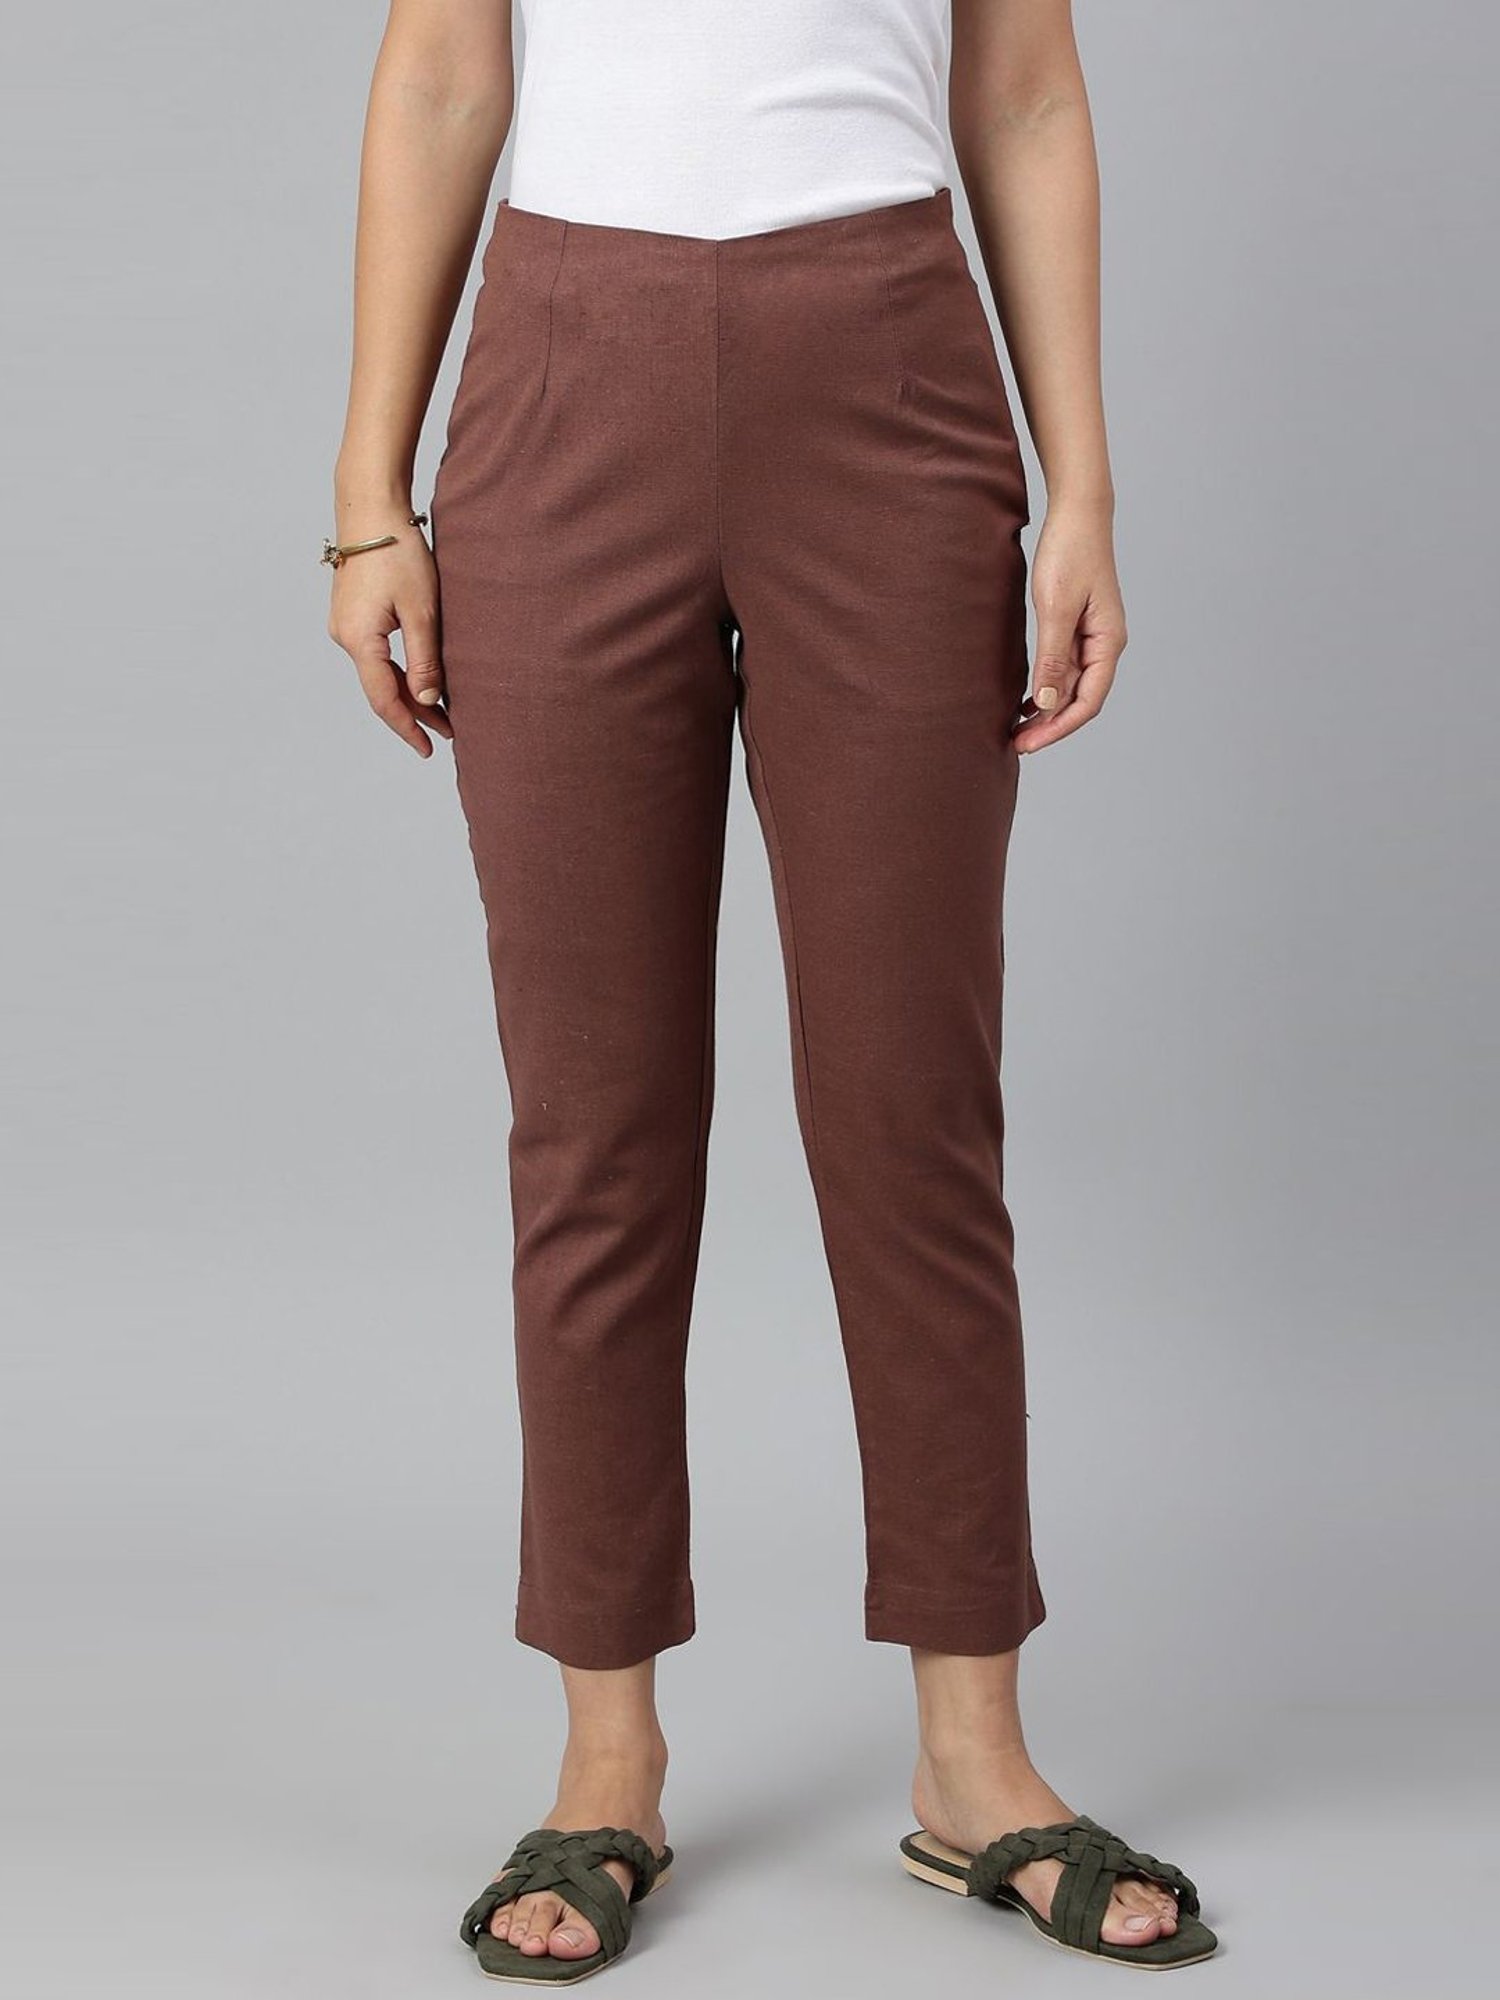 Zink London Regular Fit Women Brown Trousers - Buy Zink London Regular Fit Women  Brown Trousers Online at Best Prices in India | Flipkart.com